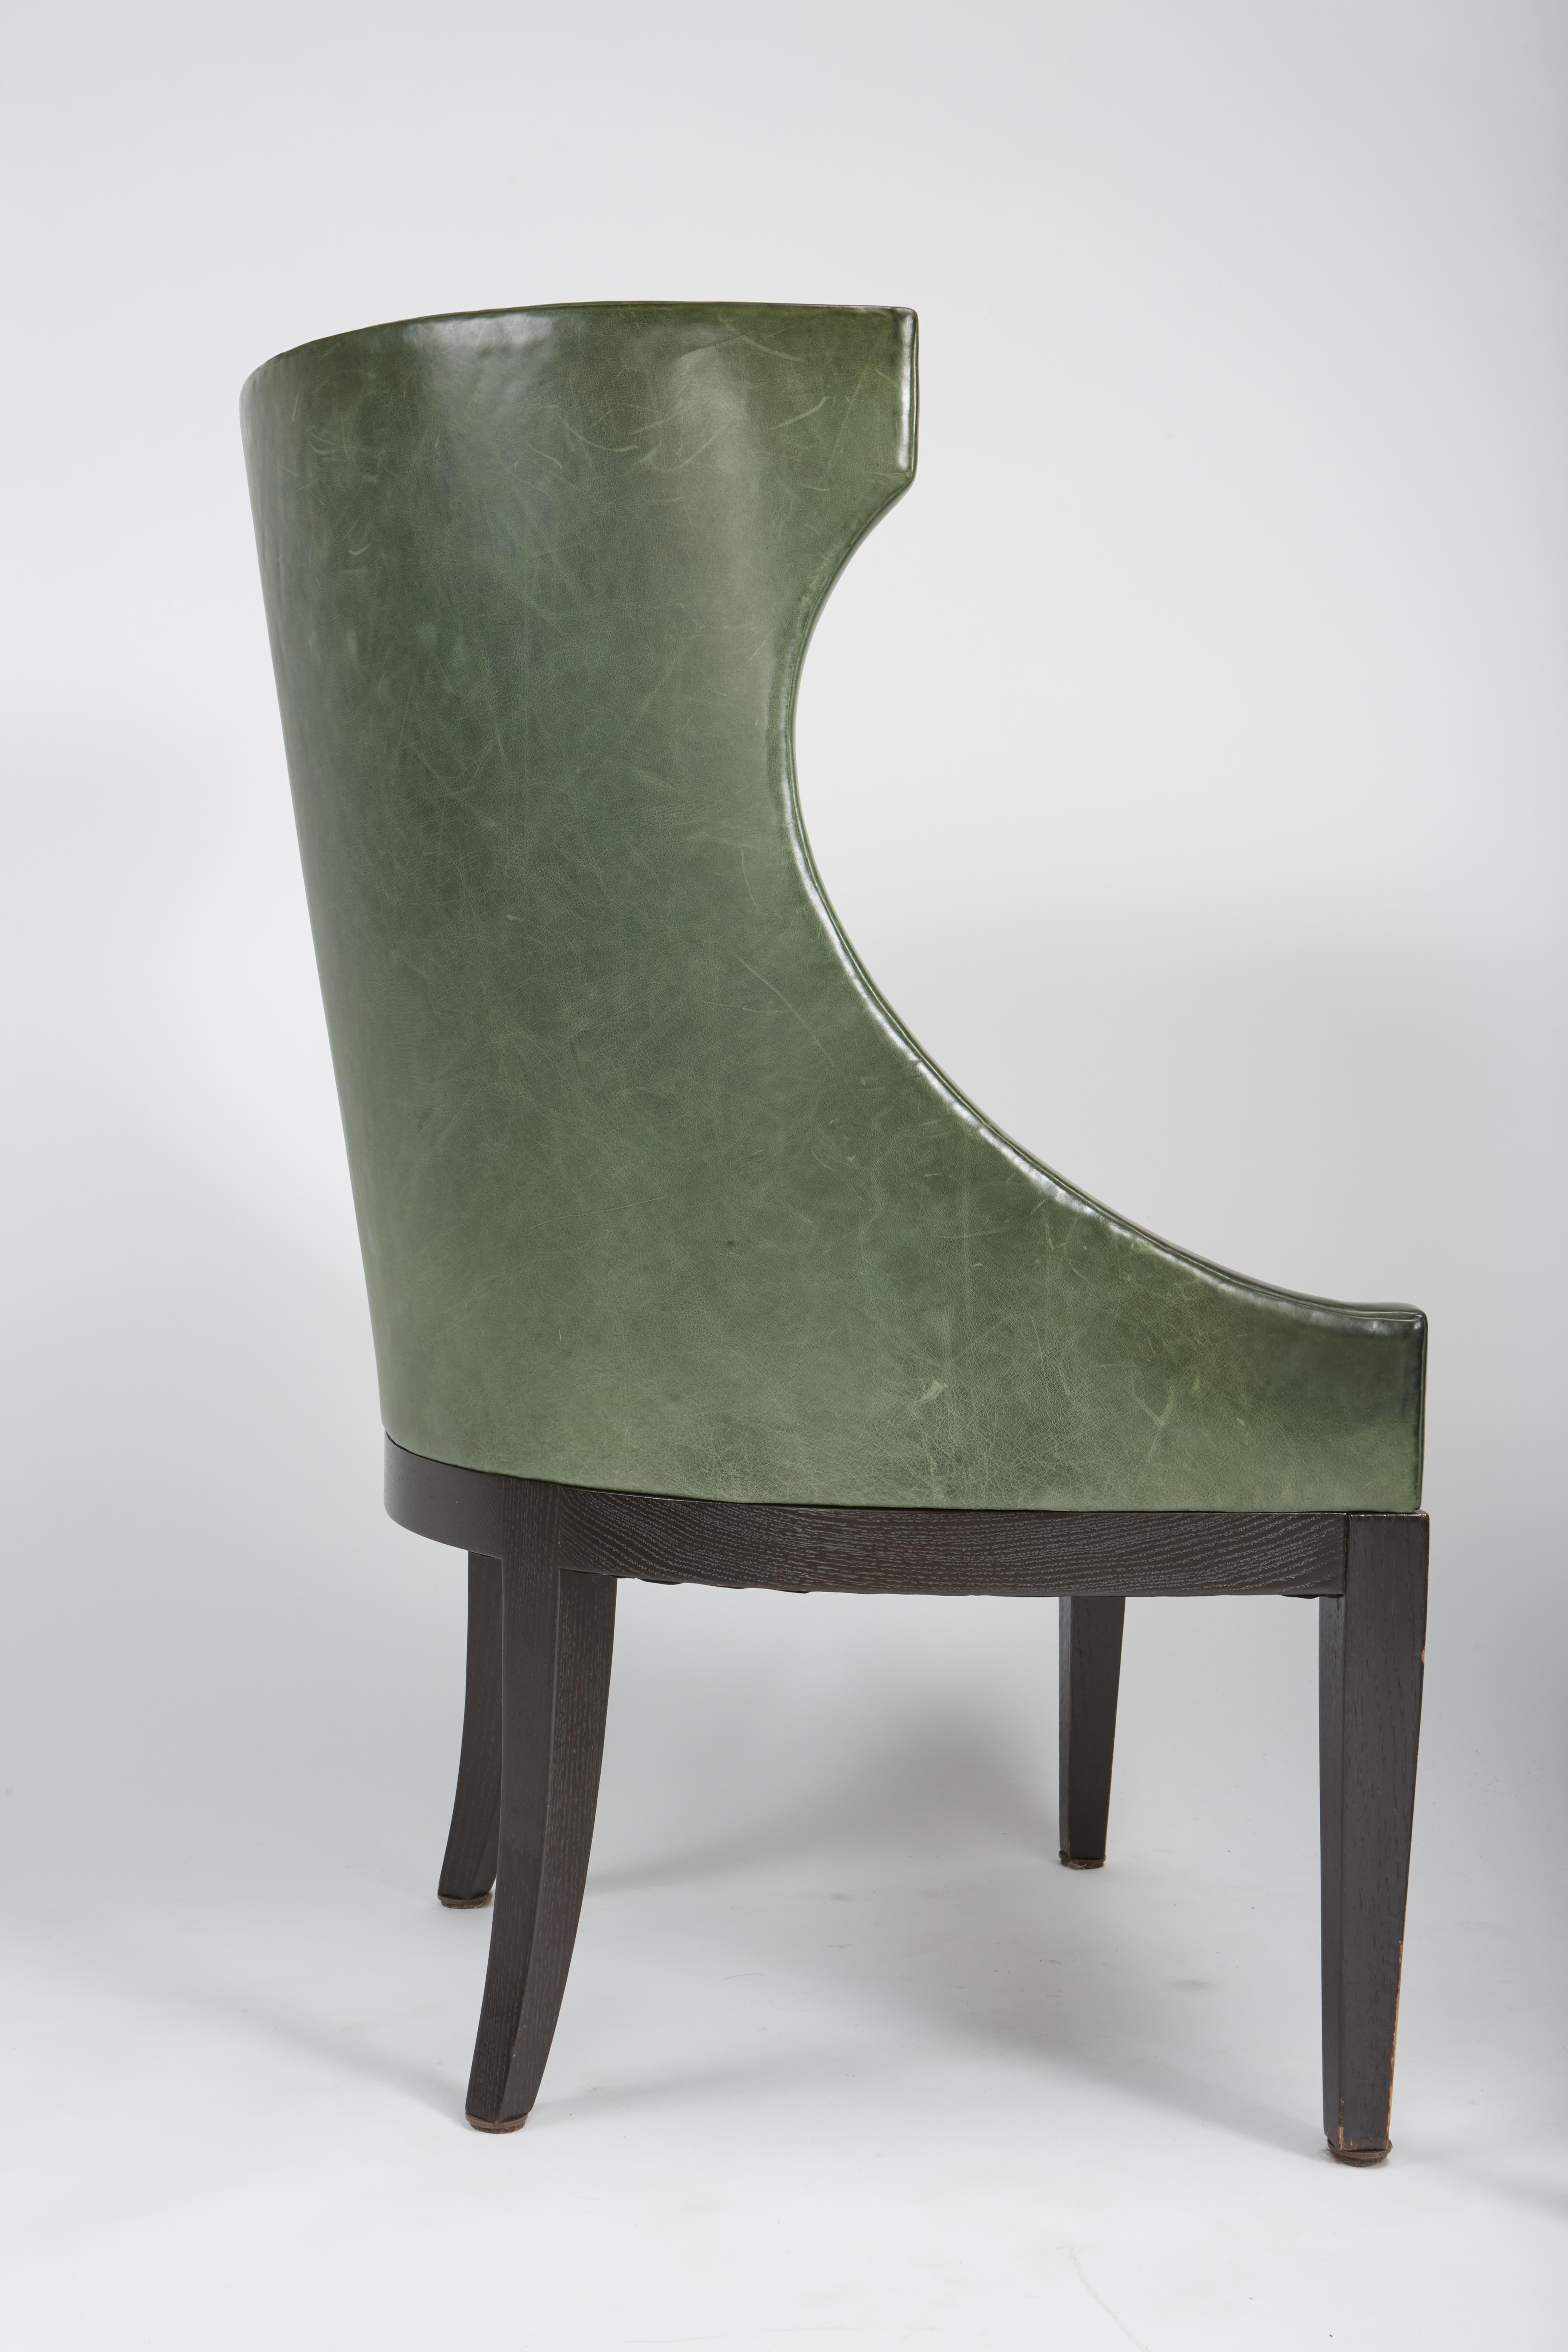 Hollywood Regency Dessin Fournir Classical Modern High Wingback with Green Leather Armchairs